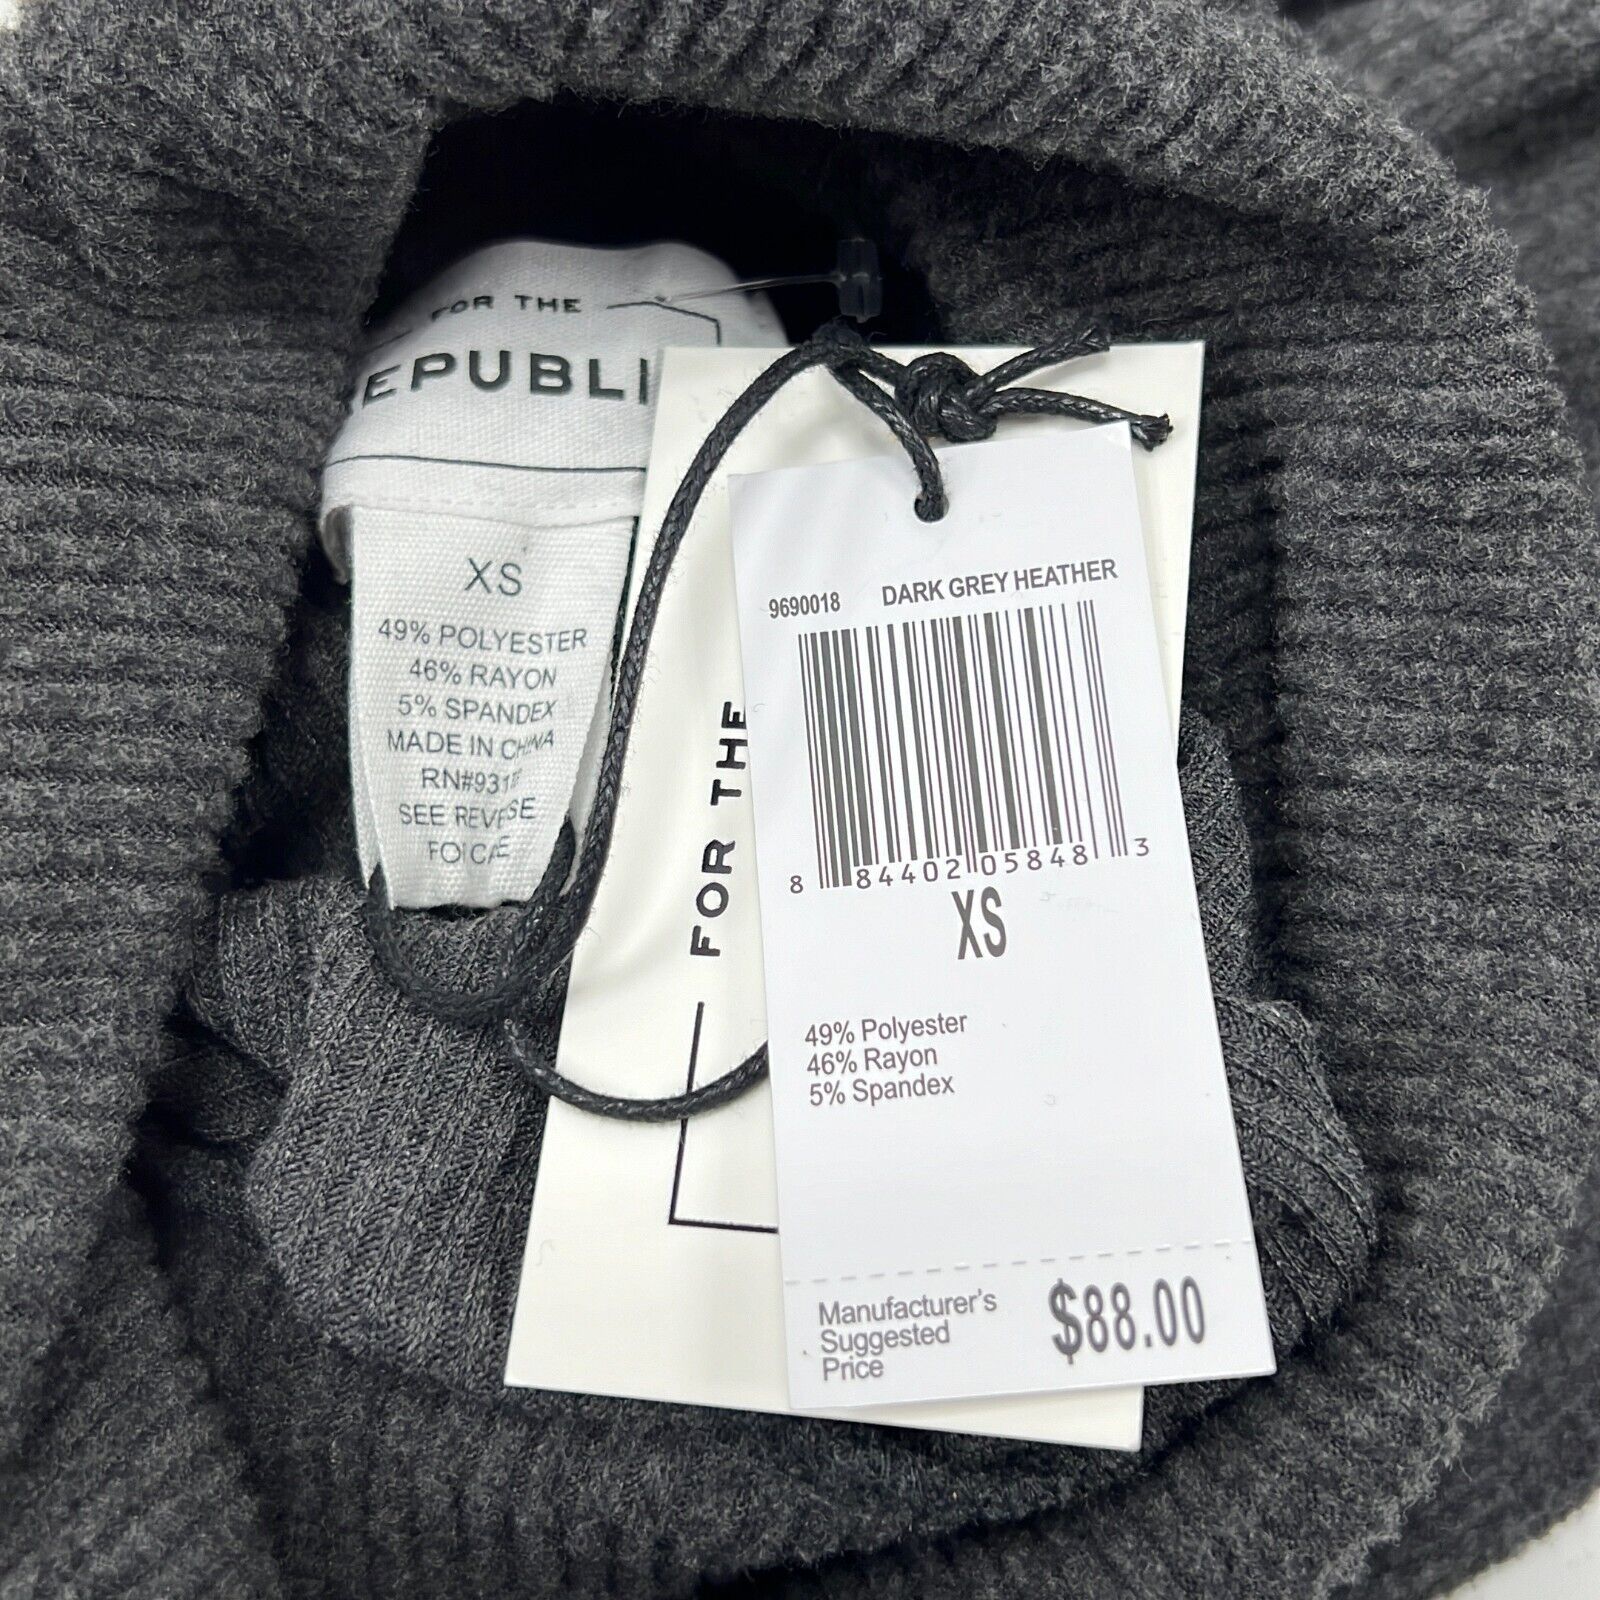 NWT For The Republic Women's Gray Heather Turtle Neck Sweater Dress Size XS